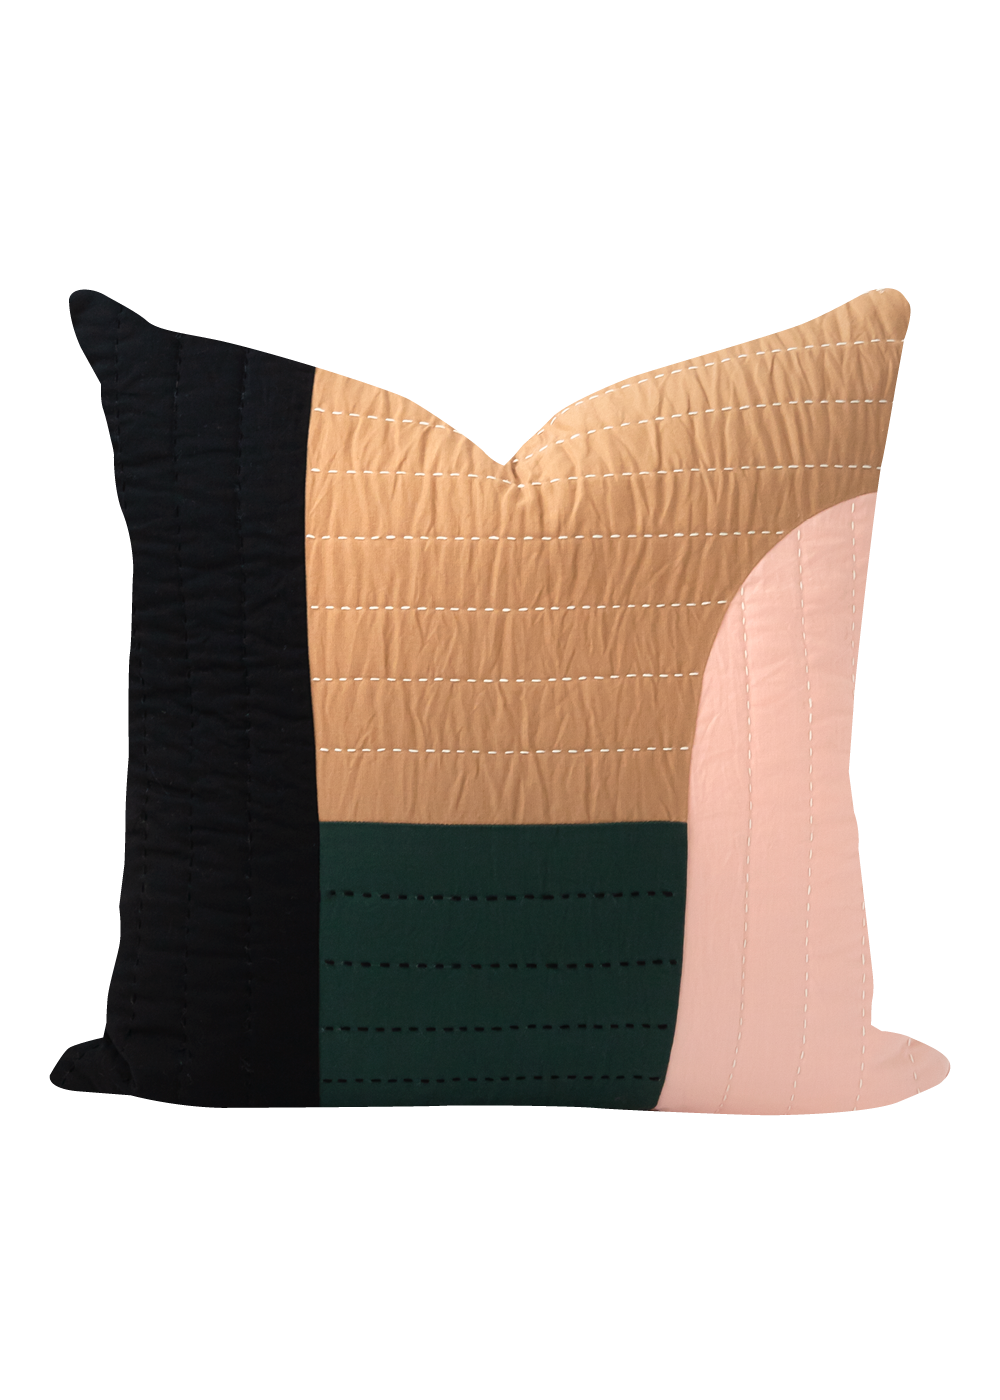 Dunne Quilted Pillow Cover